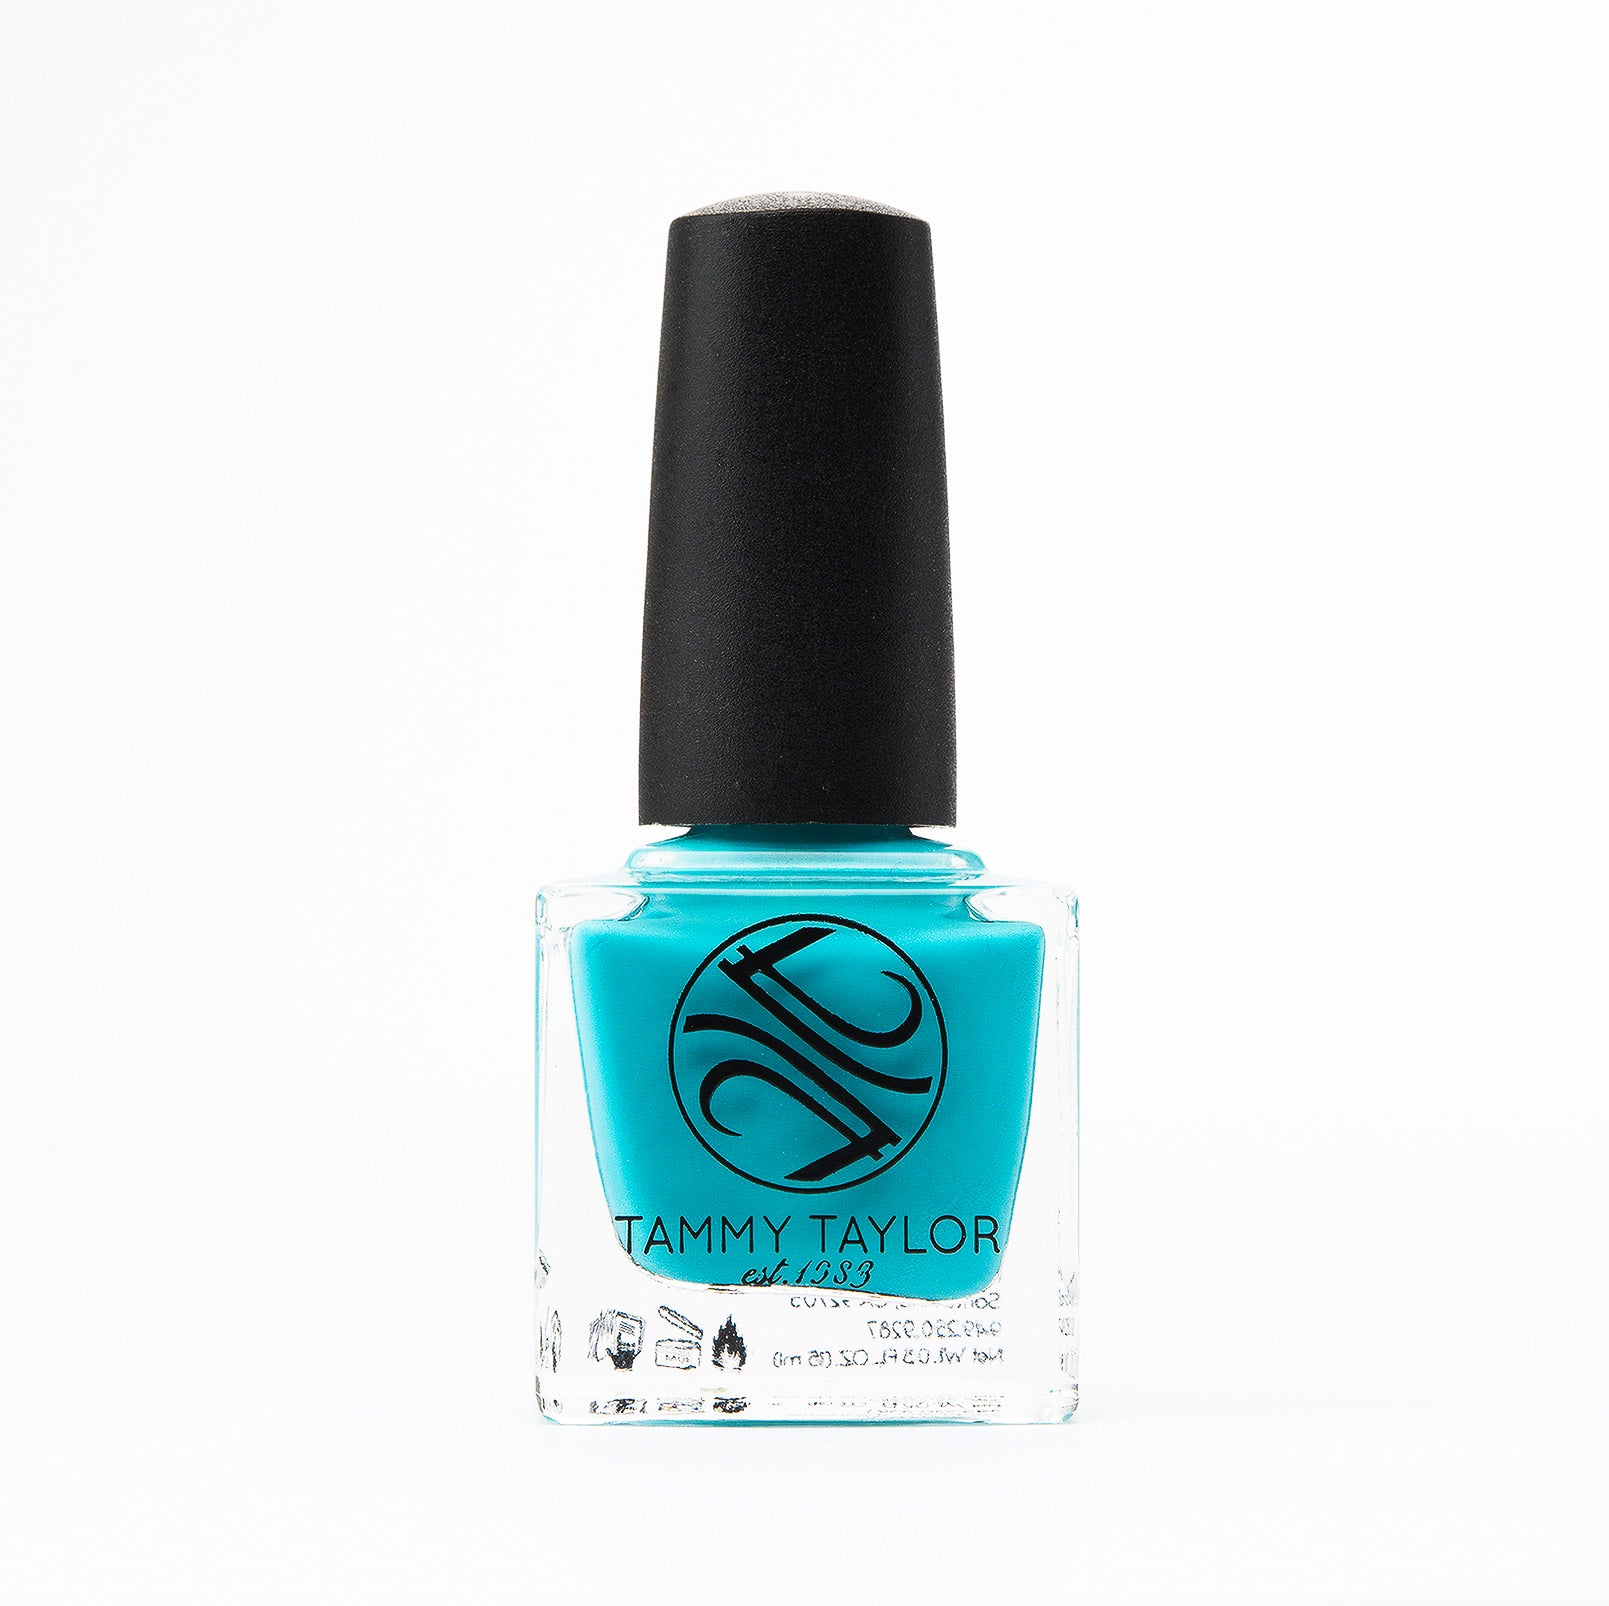 Find Your Bliss Nail Lacquer